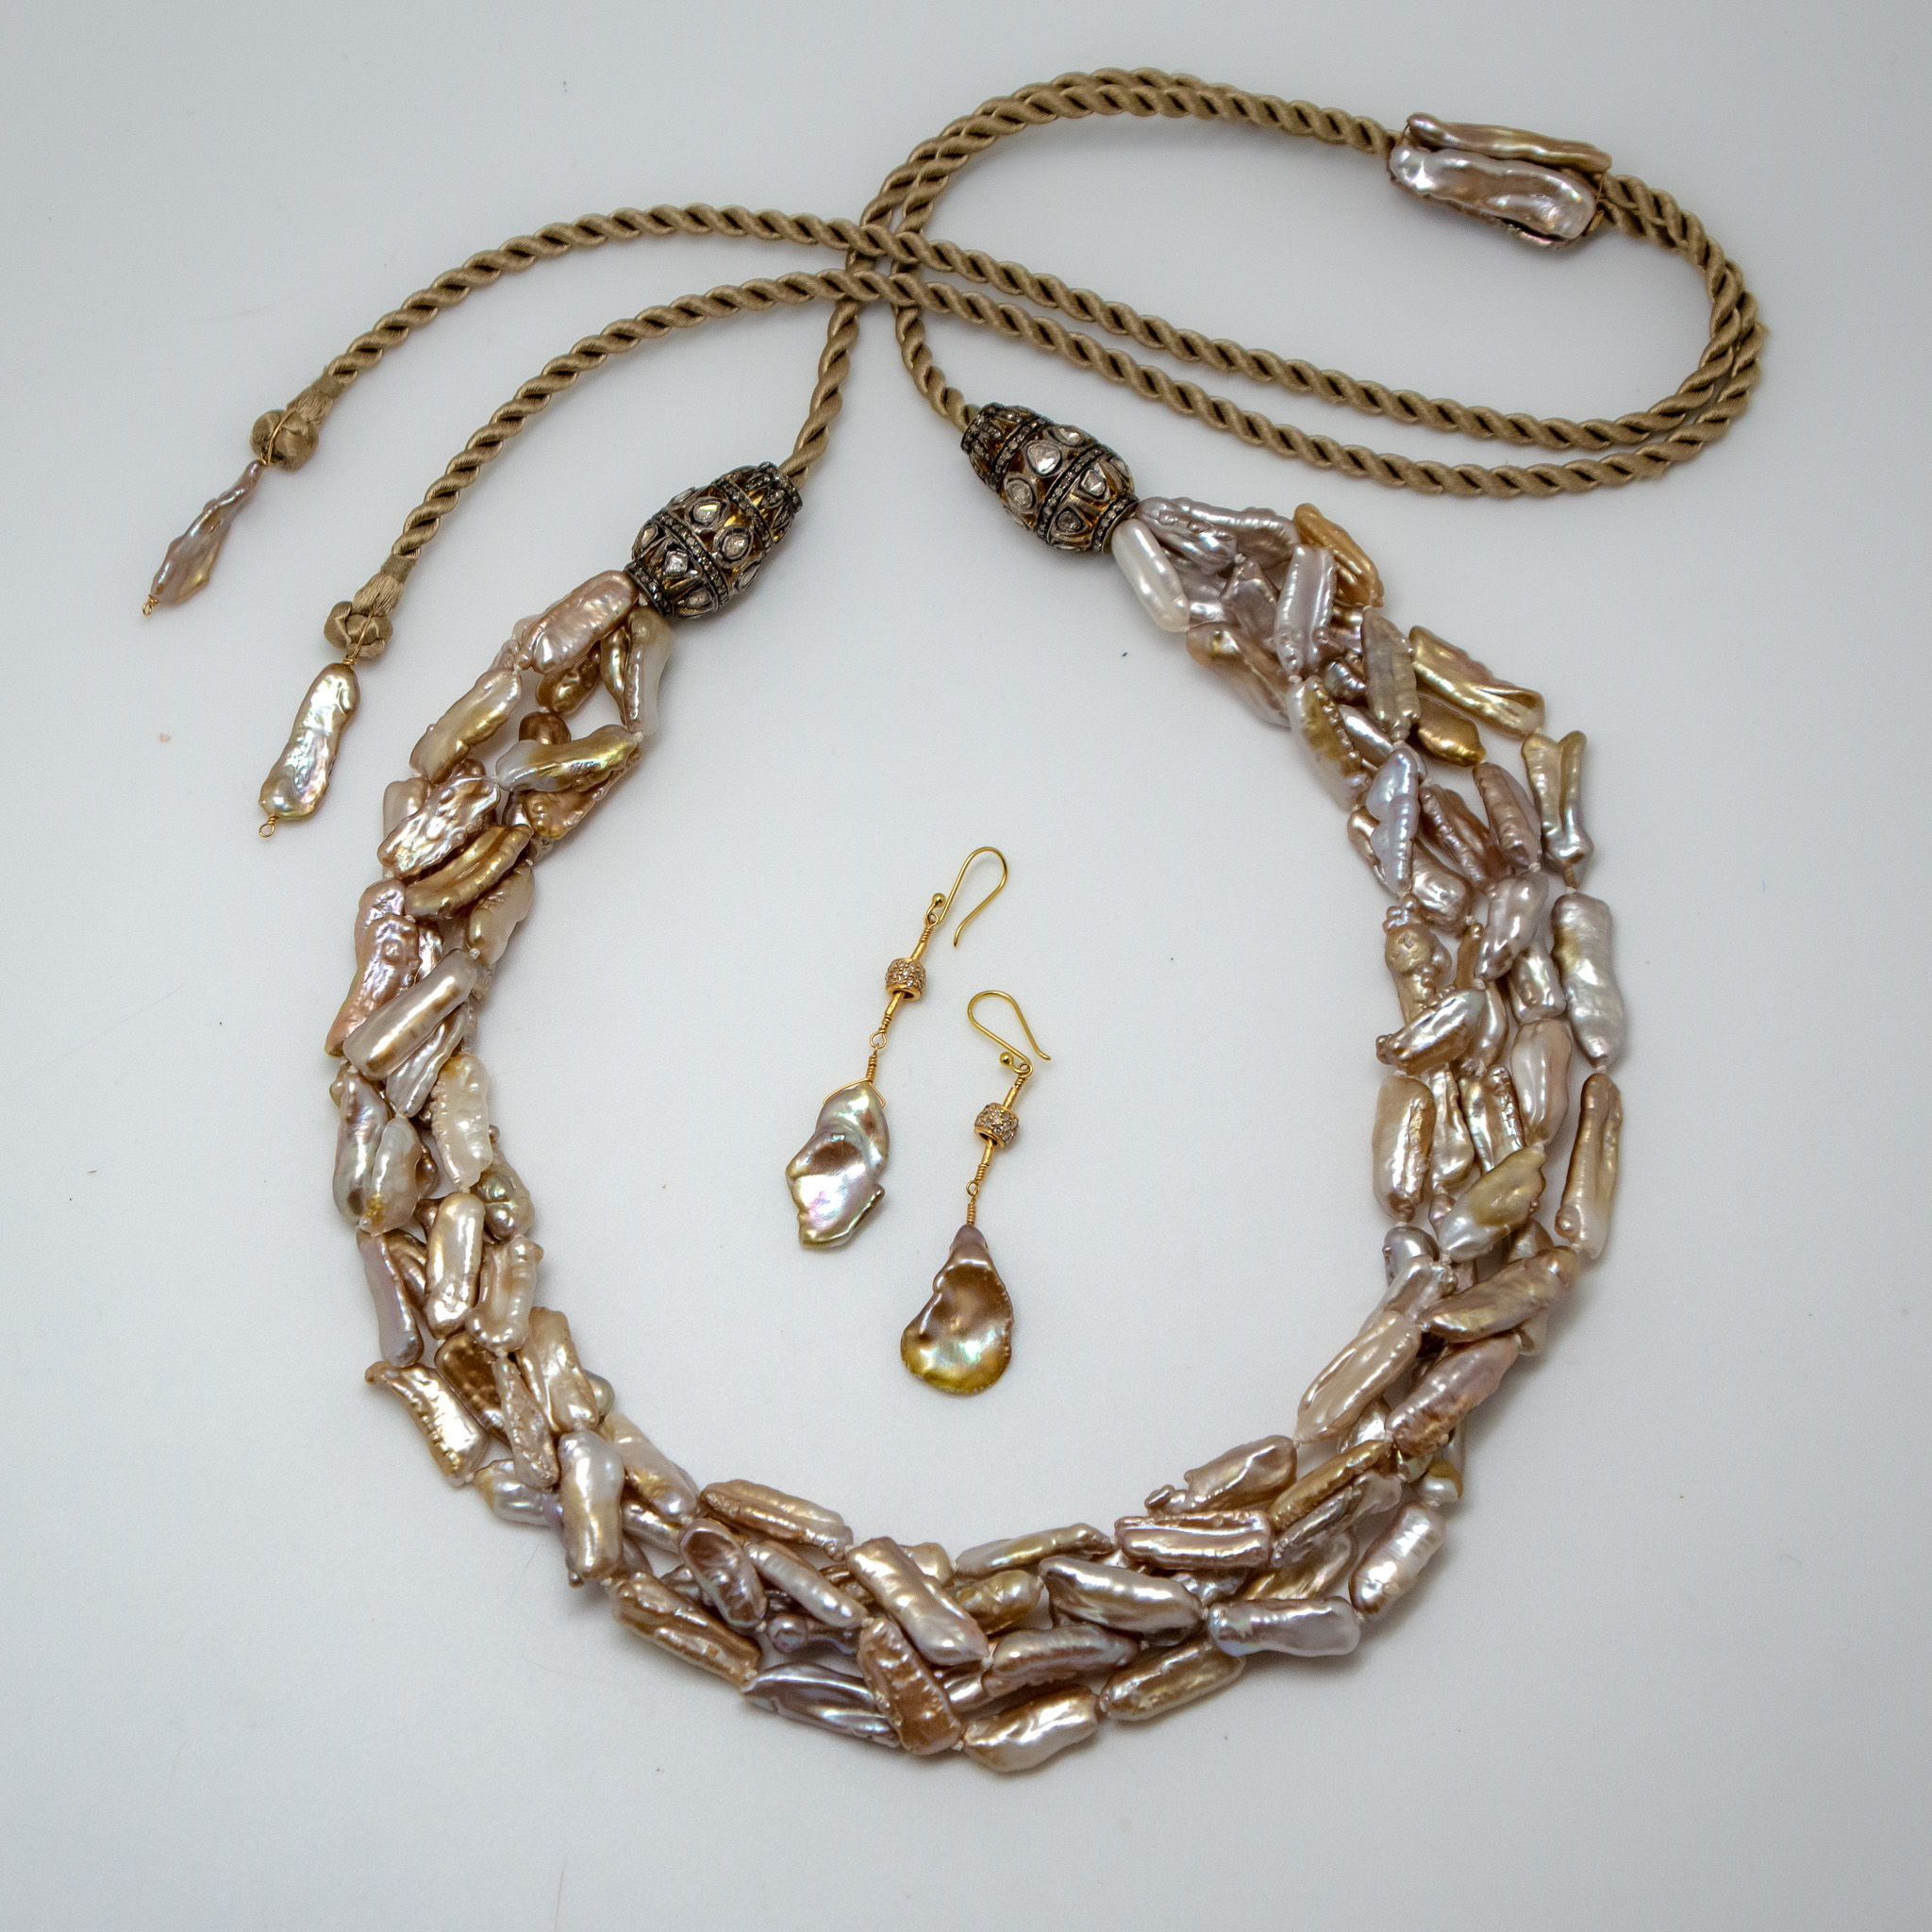 five strands of freshwater "Biwa" stick pearls twist into a shimmering rope